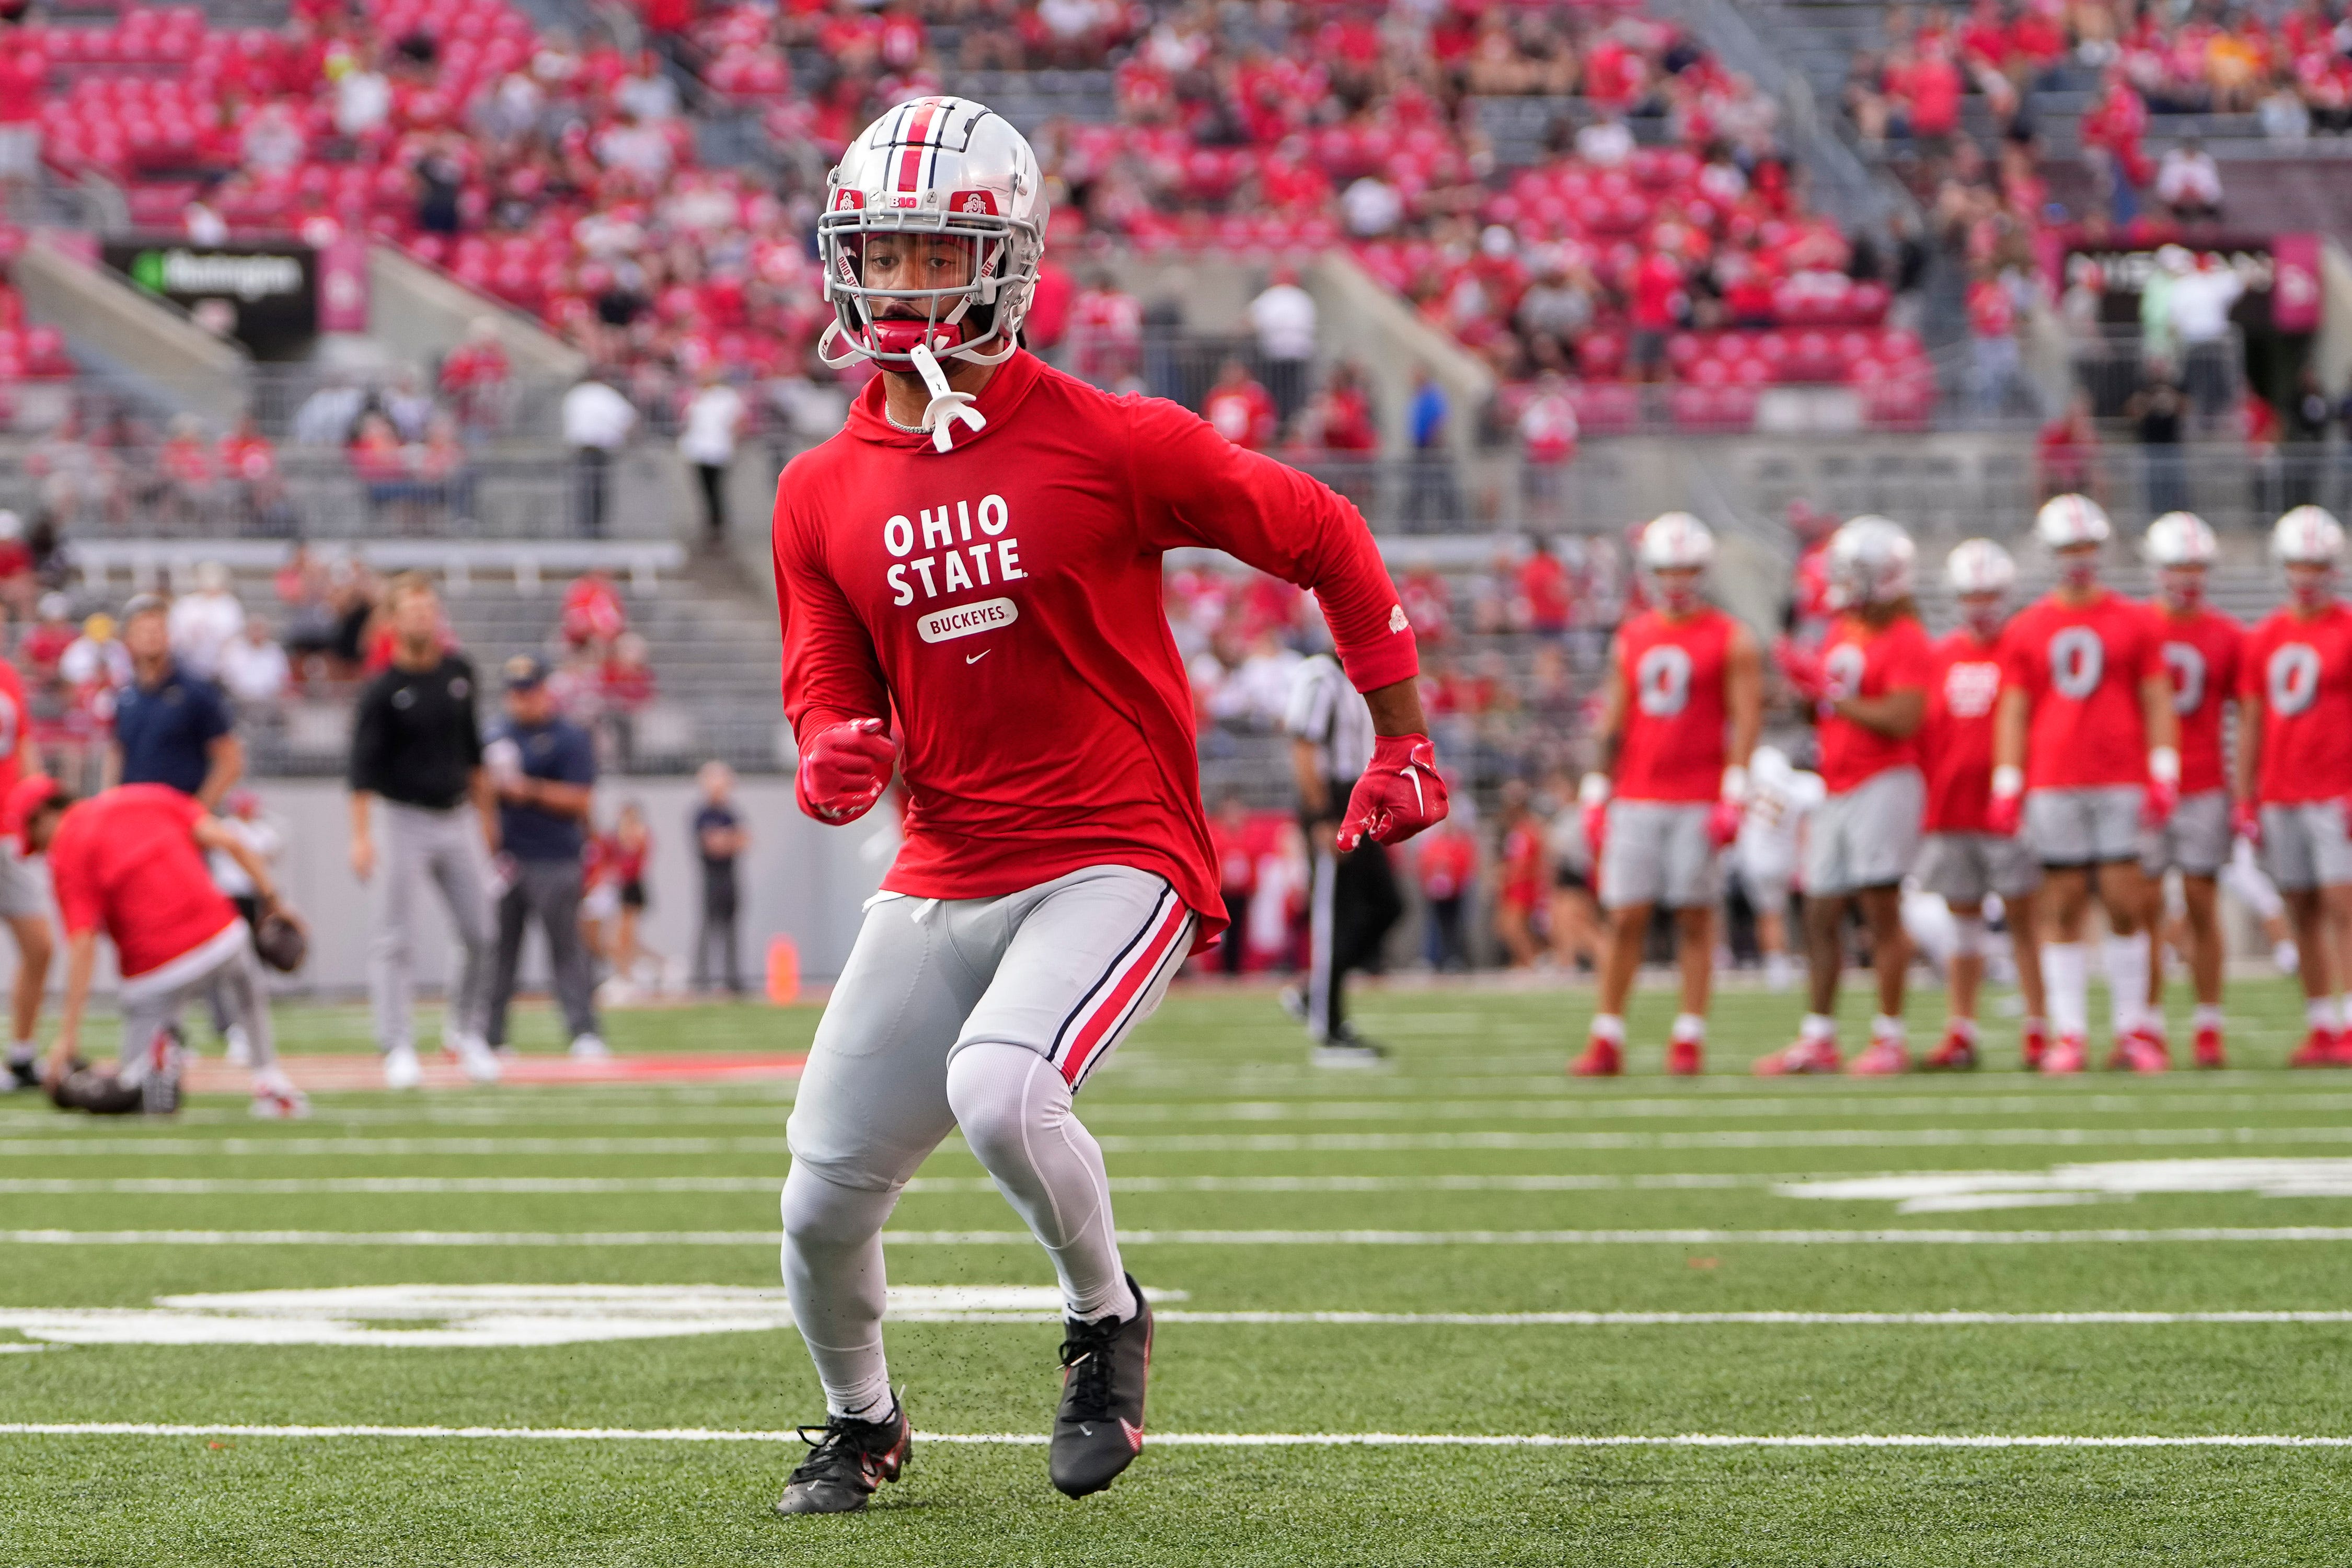 Family of Ohio State's Jaxon Smith-Njigba hits back at comments made by ESPN's Todd McShay